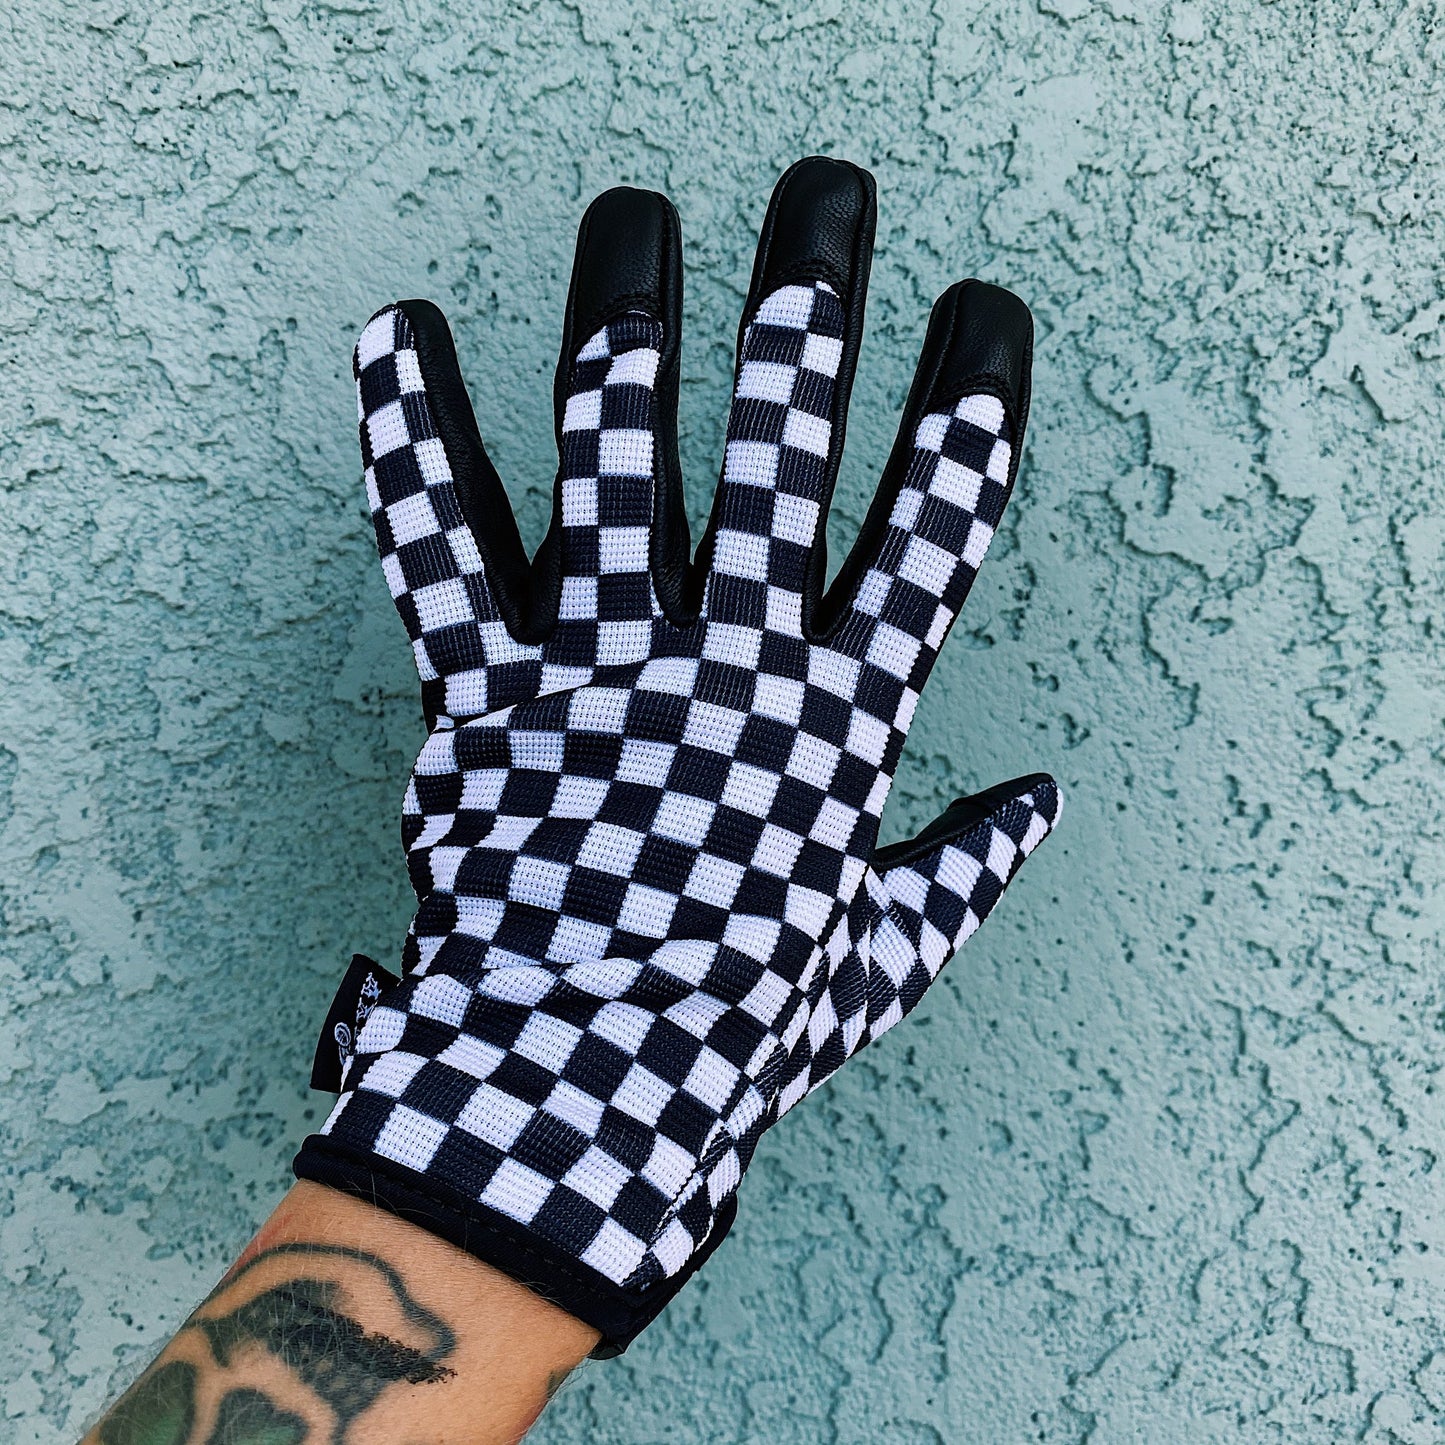 AXEL CO. Checkers Leather/Mesh Glove - Black/White